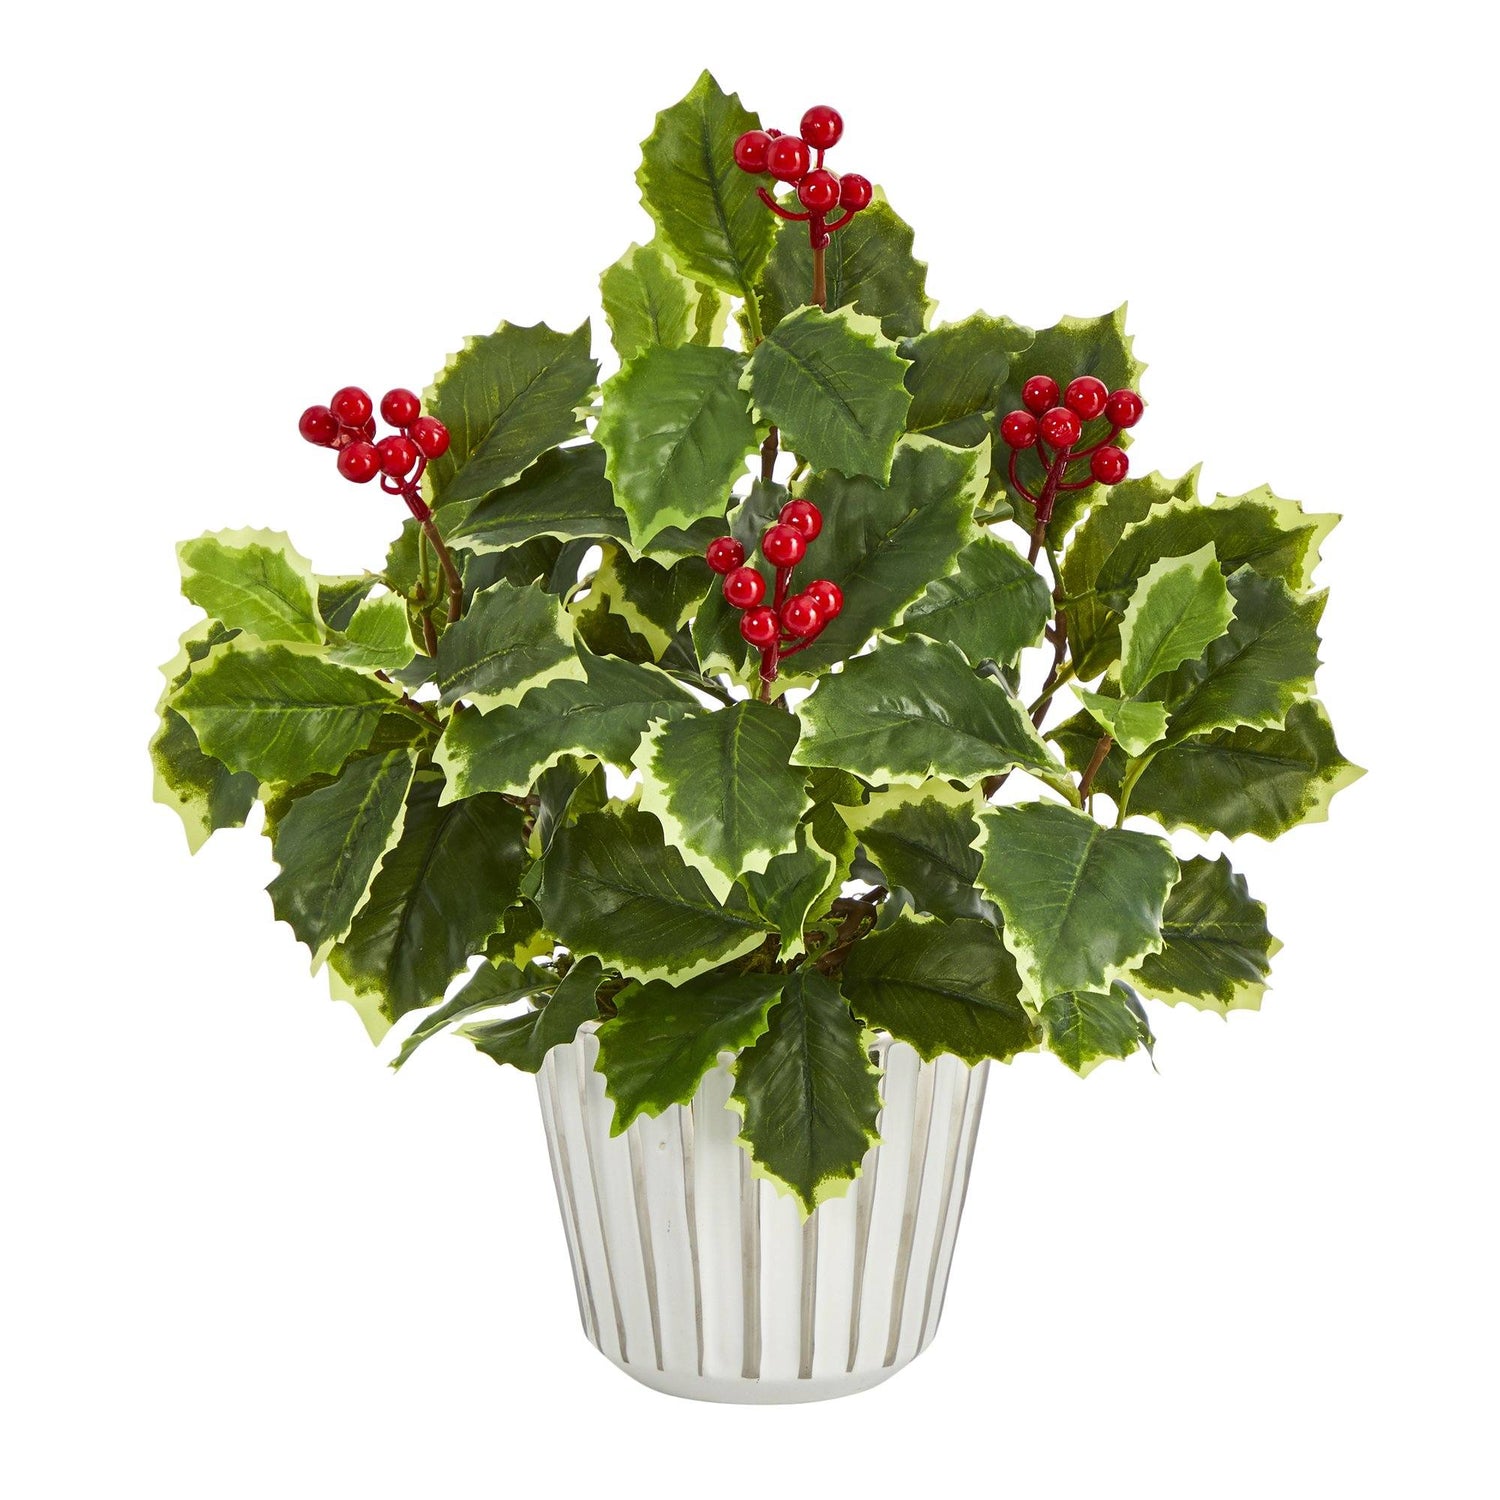 13” Variegated Holly Leaf Artificial Plant in White Planter with Silver Trimming (Real Touch)